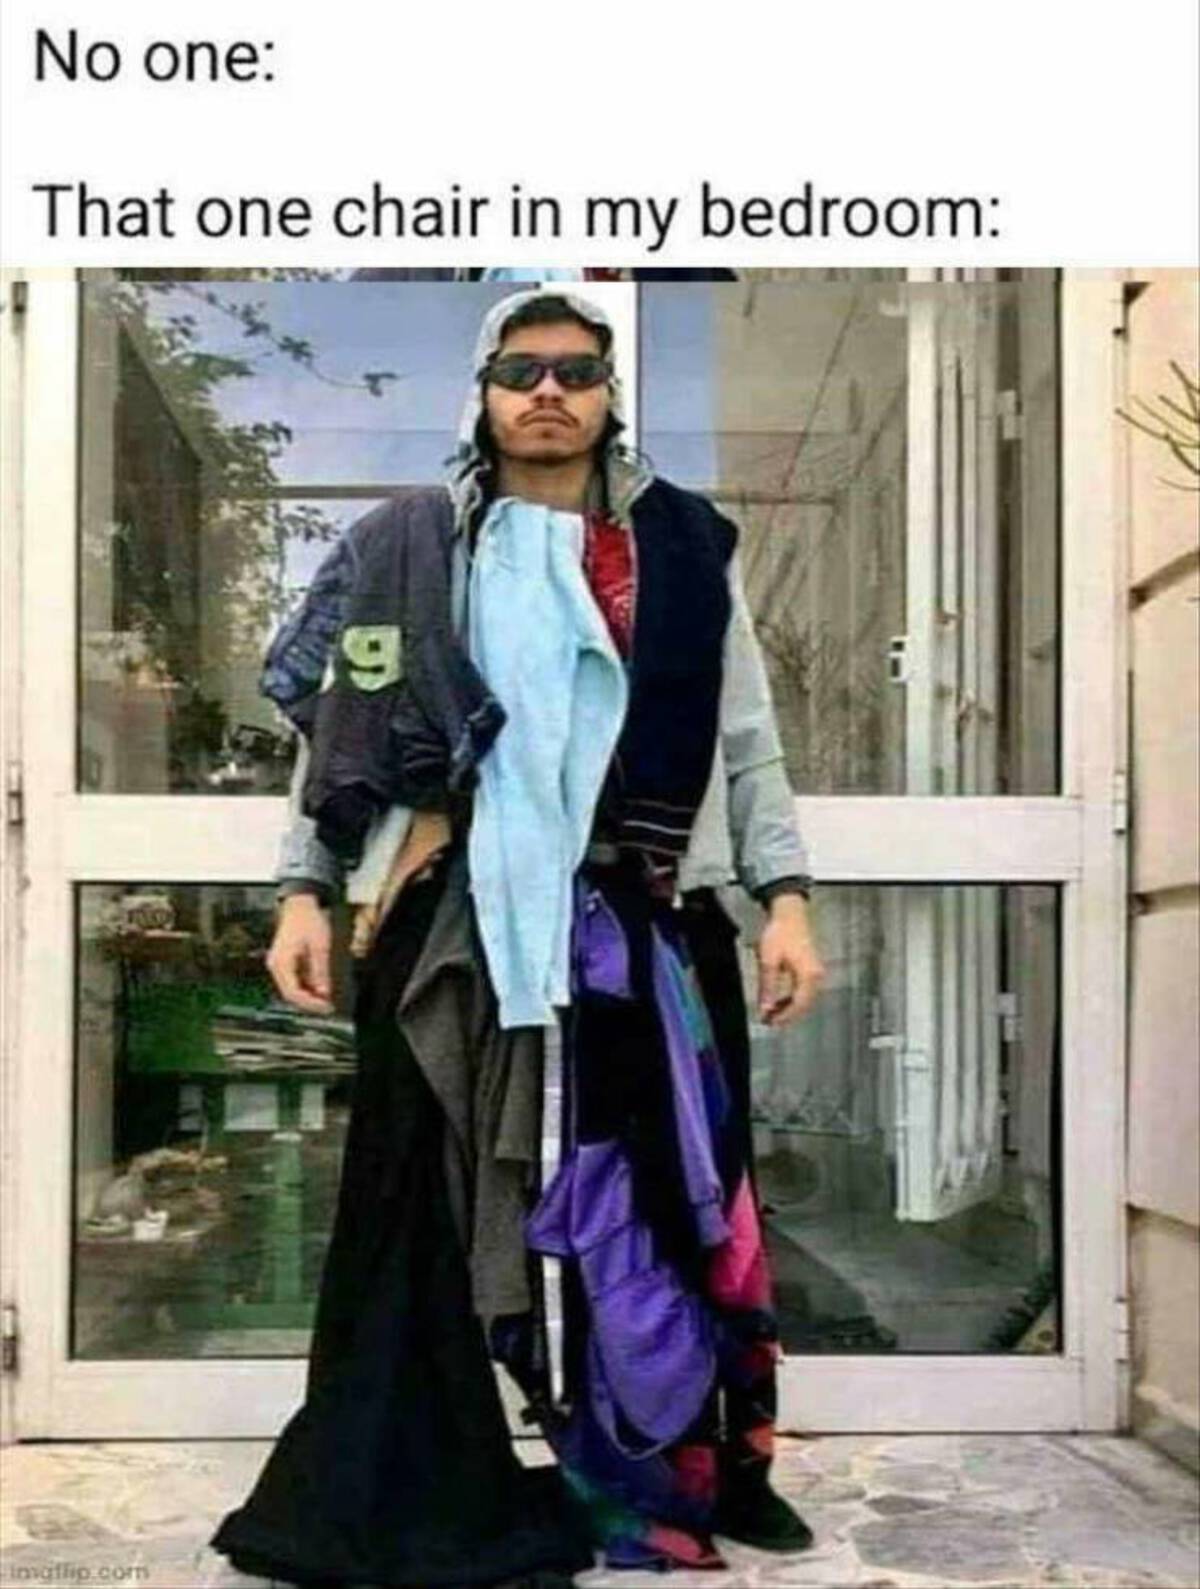 cosplay - No one That one chair in my bedroom Imgflip.com 9